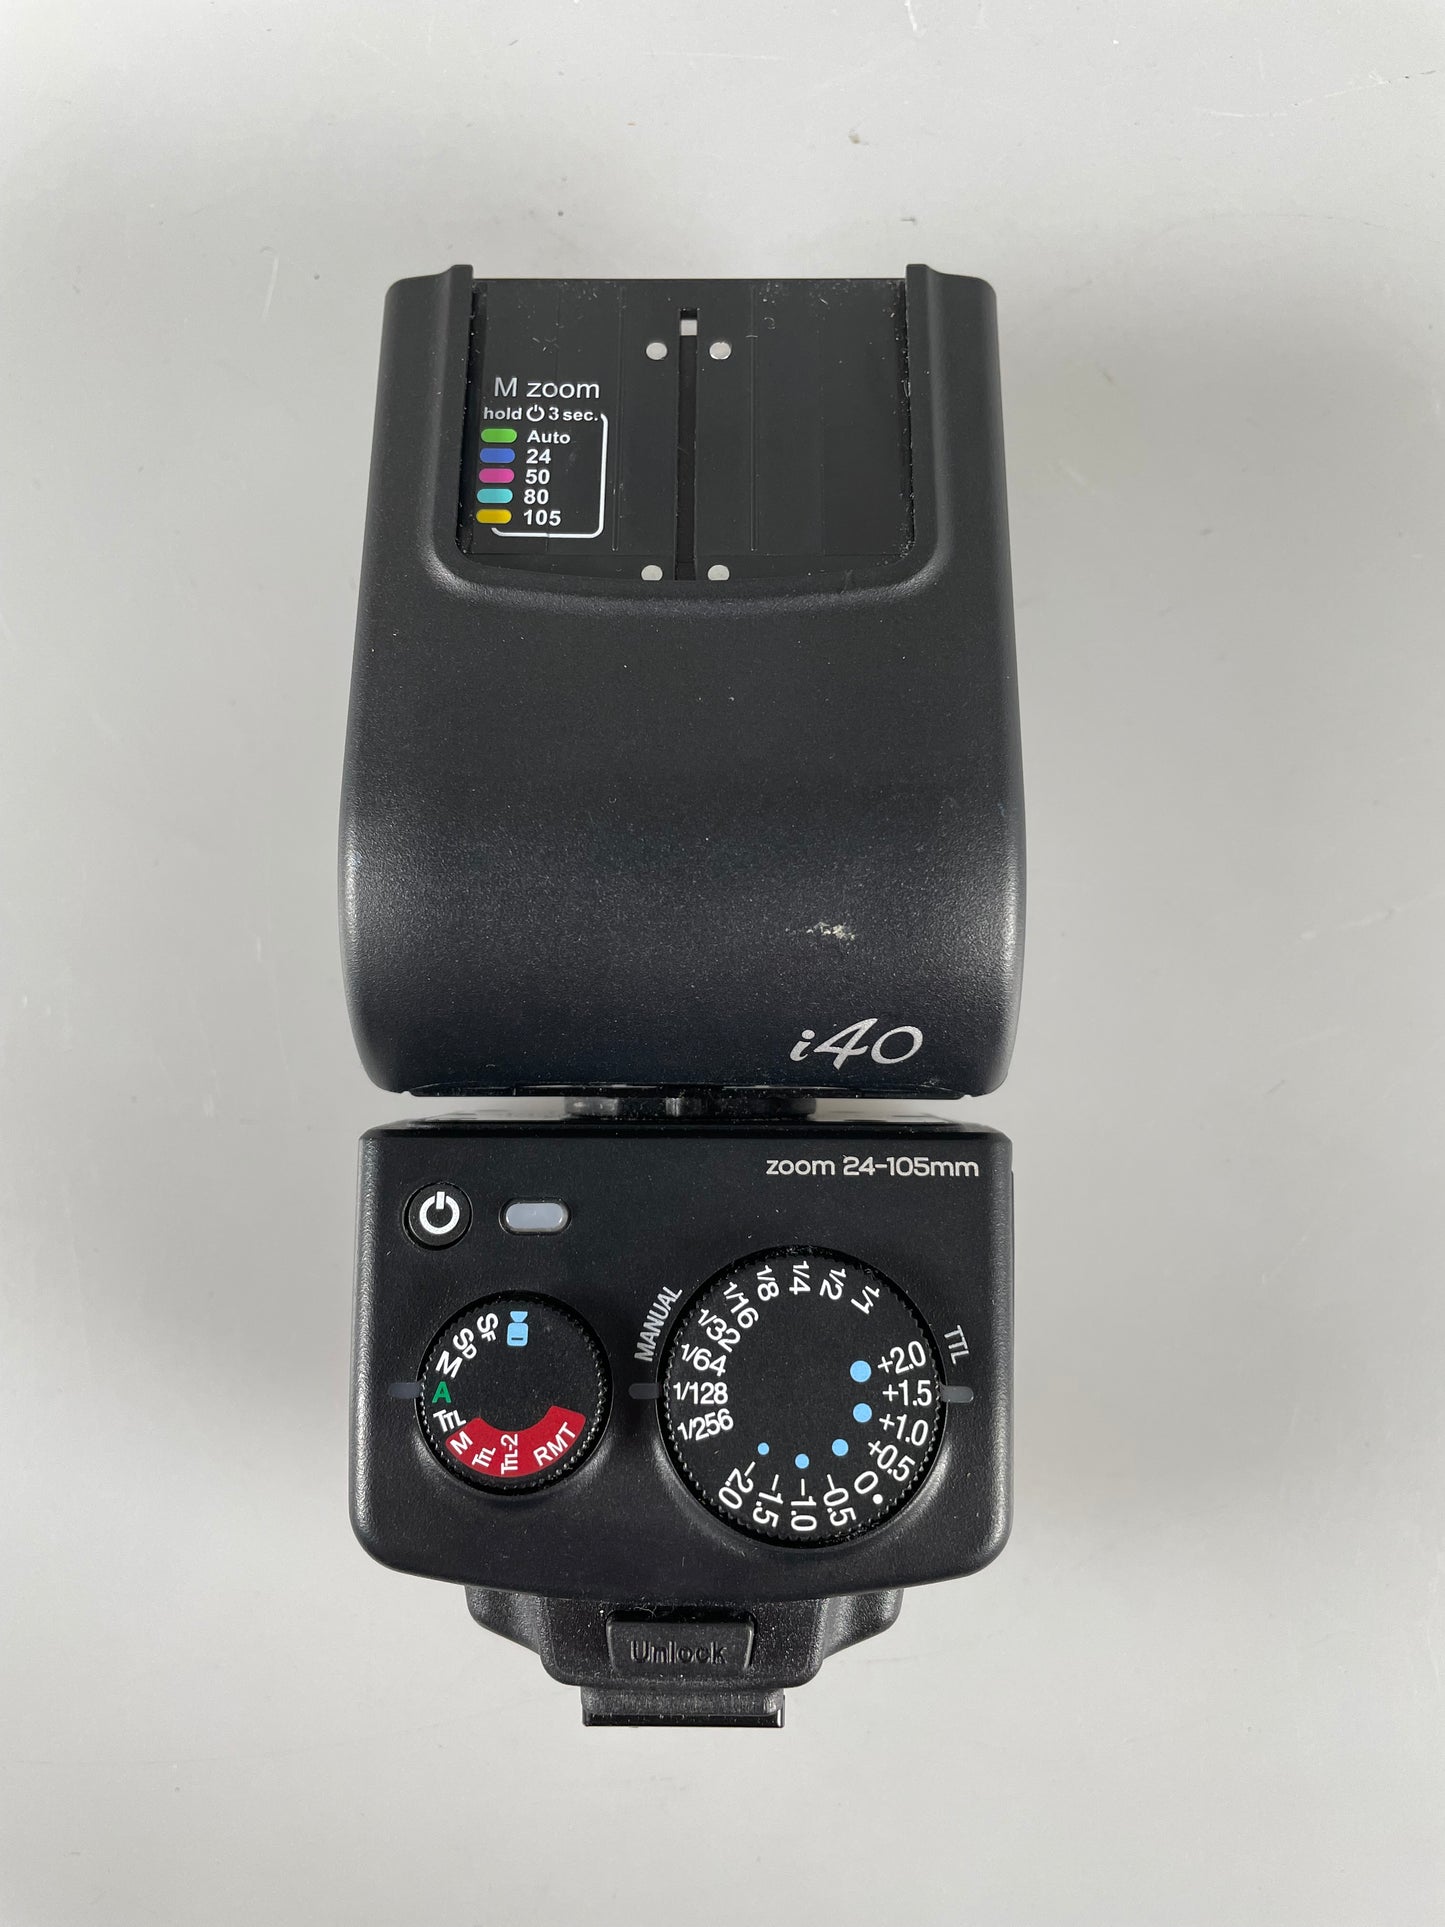 Nissin i40 compact flash for micro 4/3 cameras